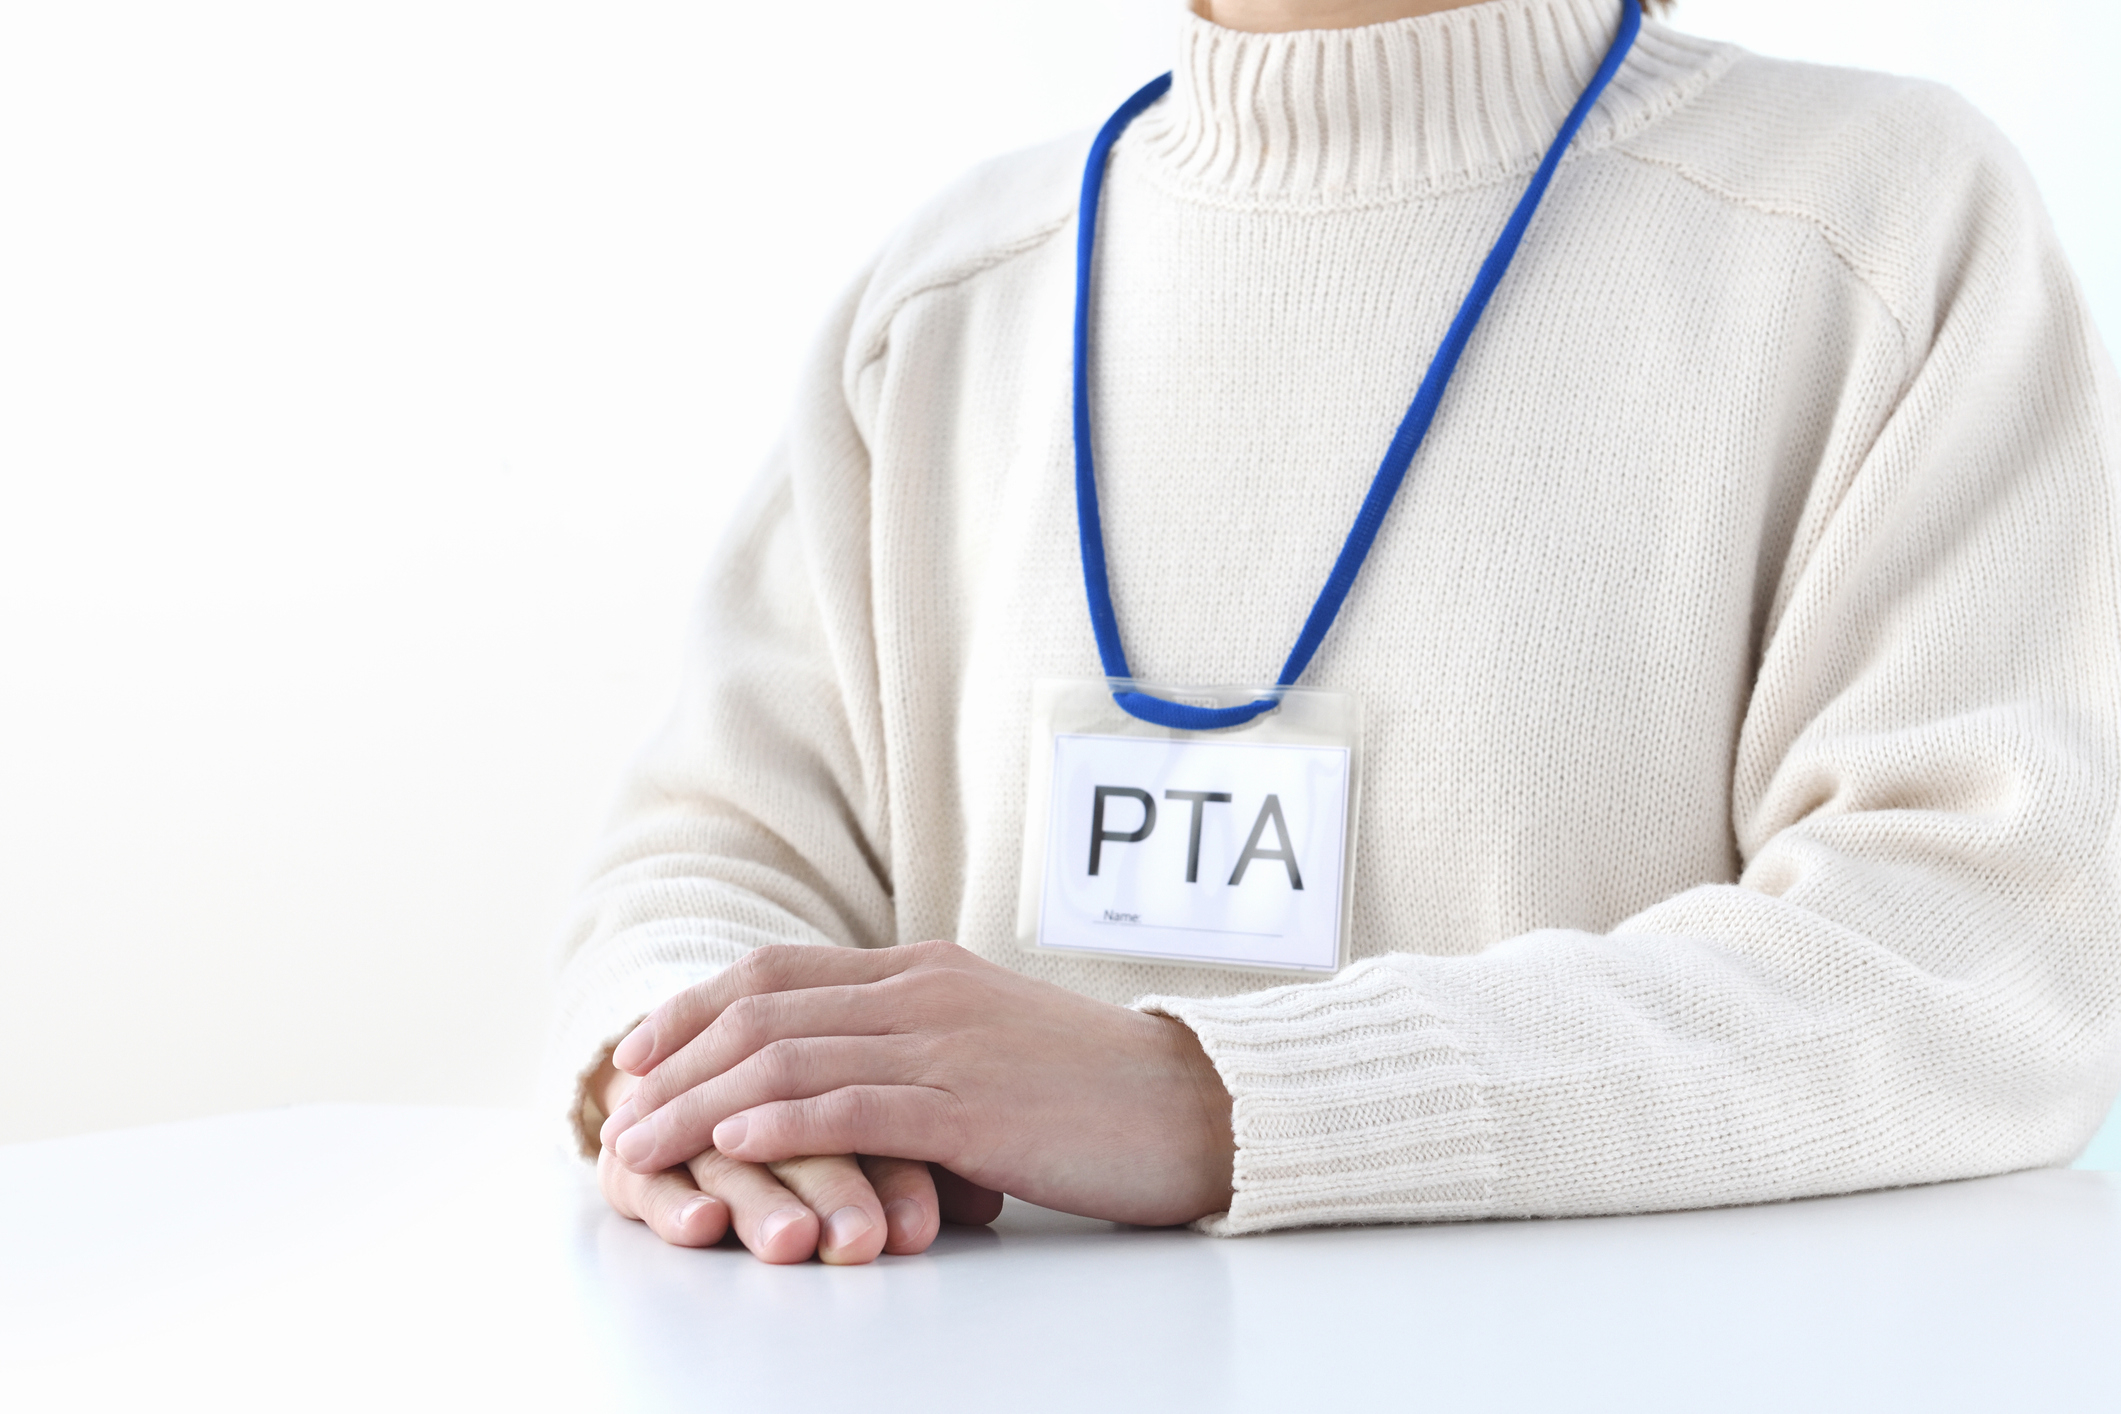 A person wearing a PTA card around their neck